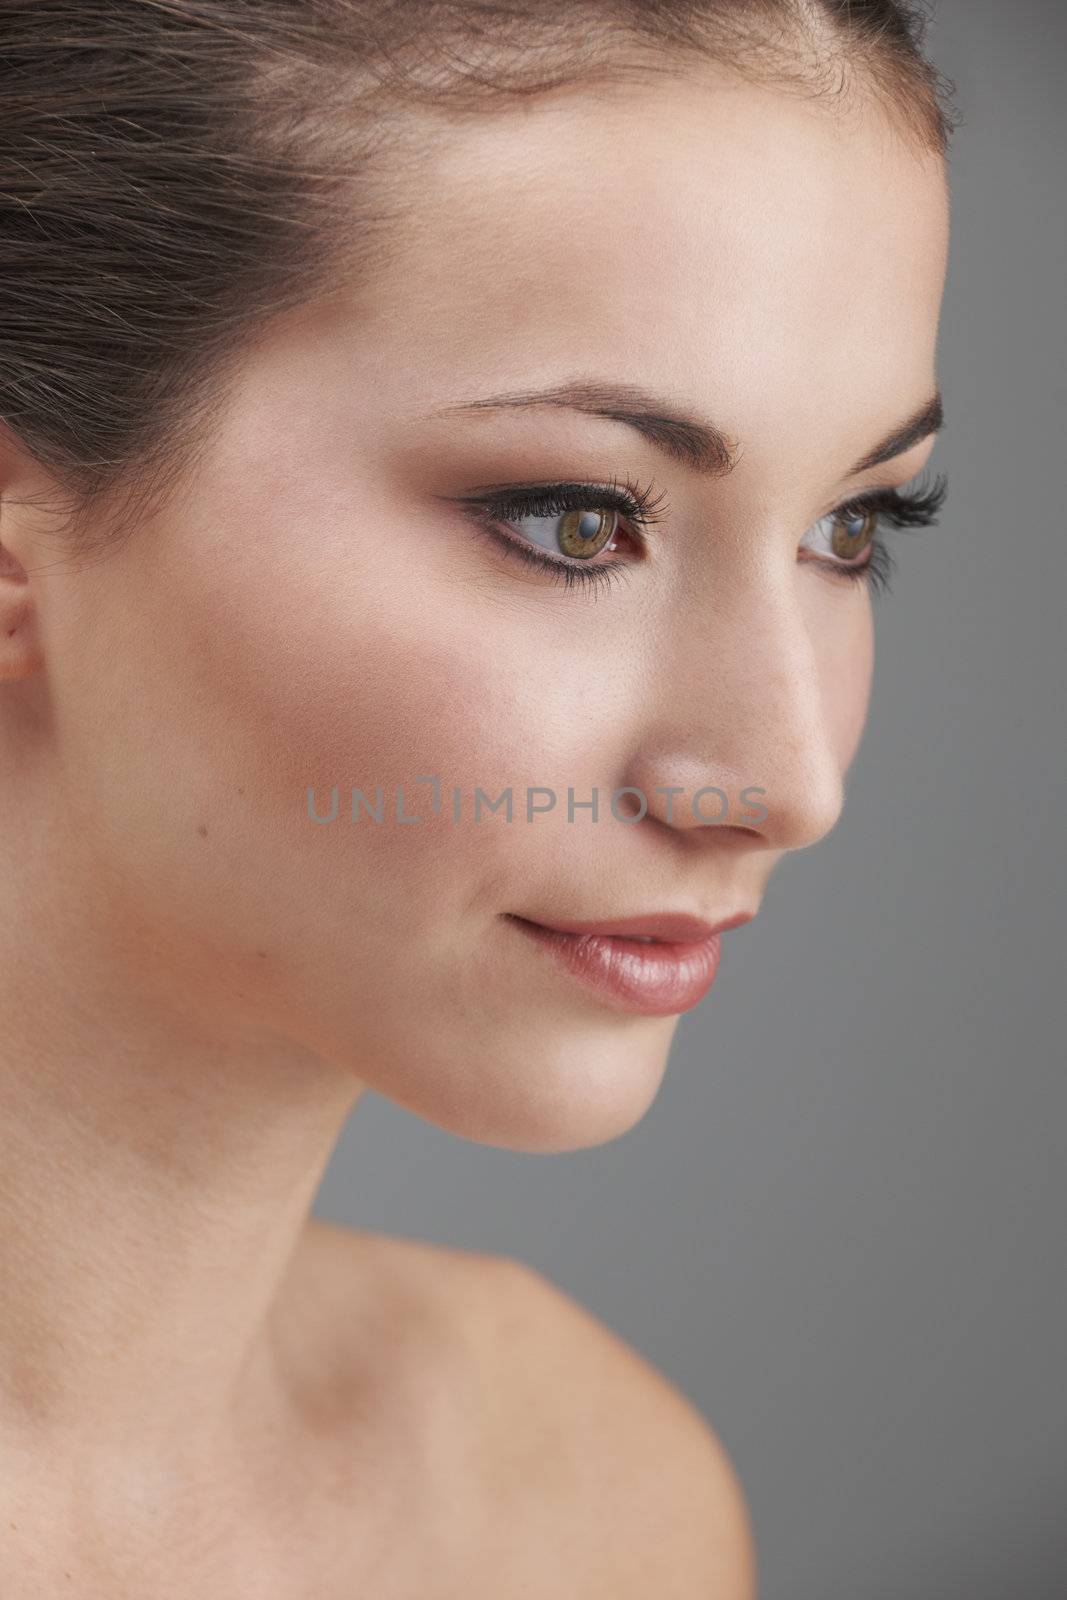 Young womans face with subtle make up and eye lash extensions